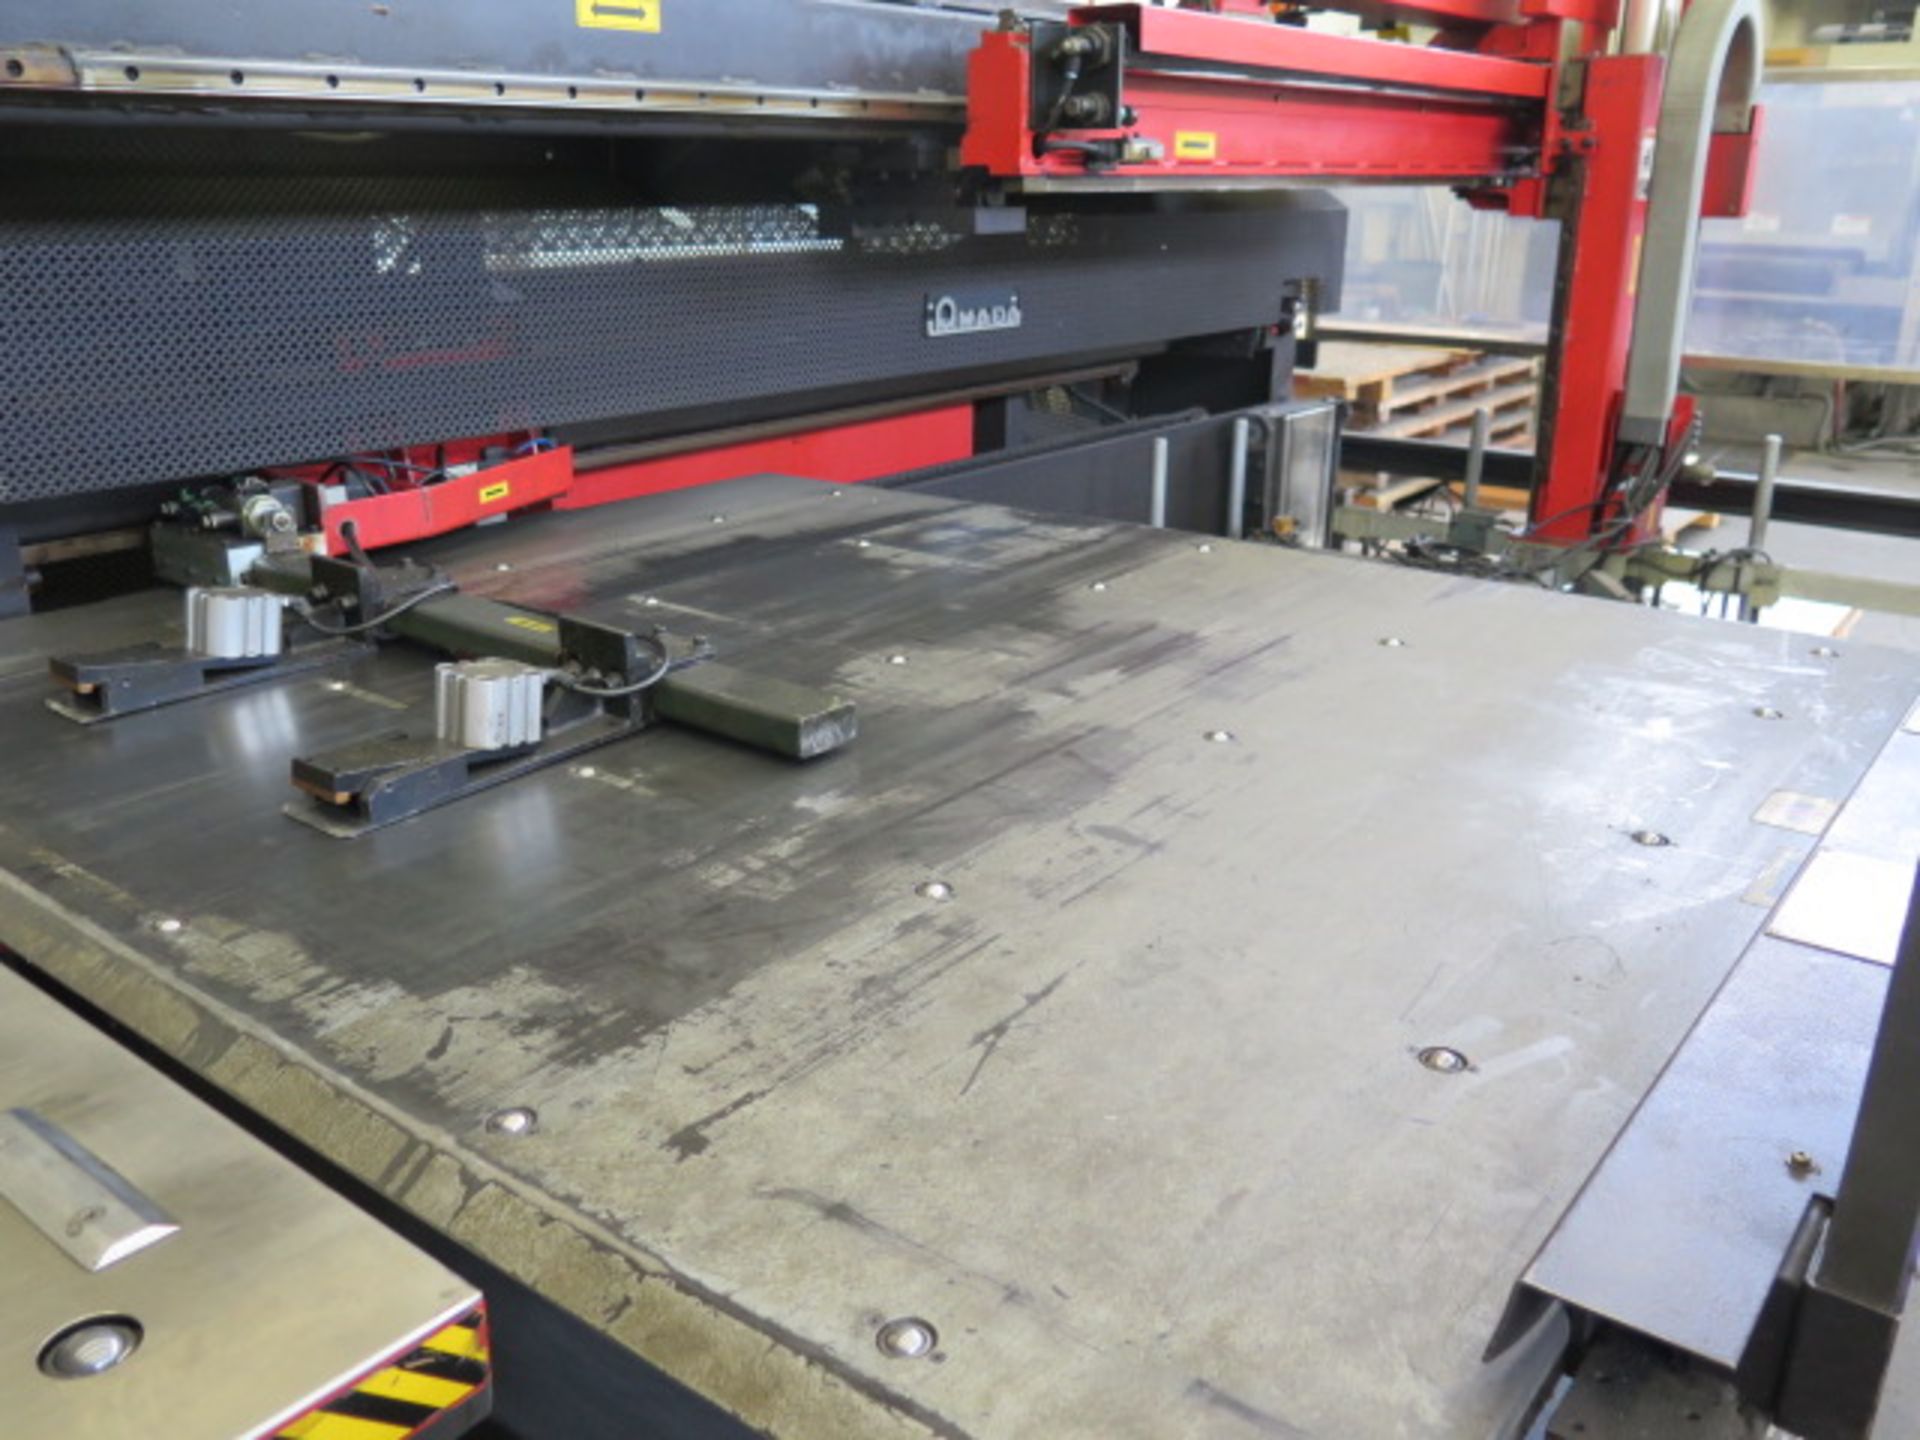 Amada VIPROS 345 30-Ton CNC Turret Punch Cell s/n 34510153 w/ 04P-C Controls, 58-Station, SOLD AS IS - Image 22 of 28